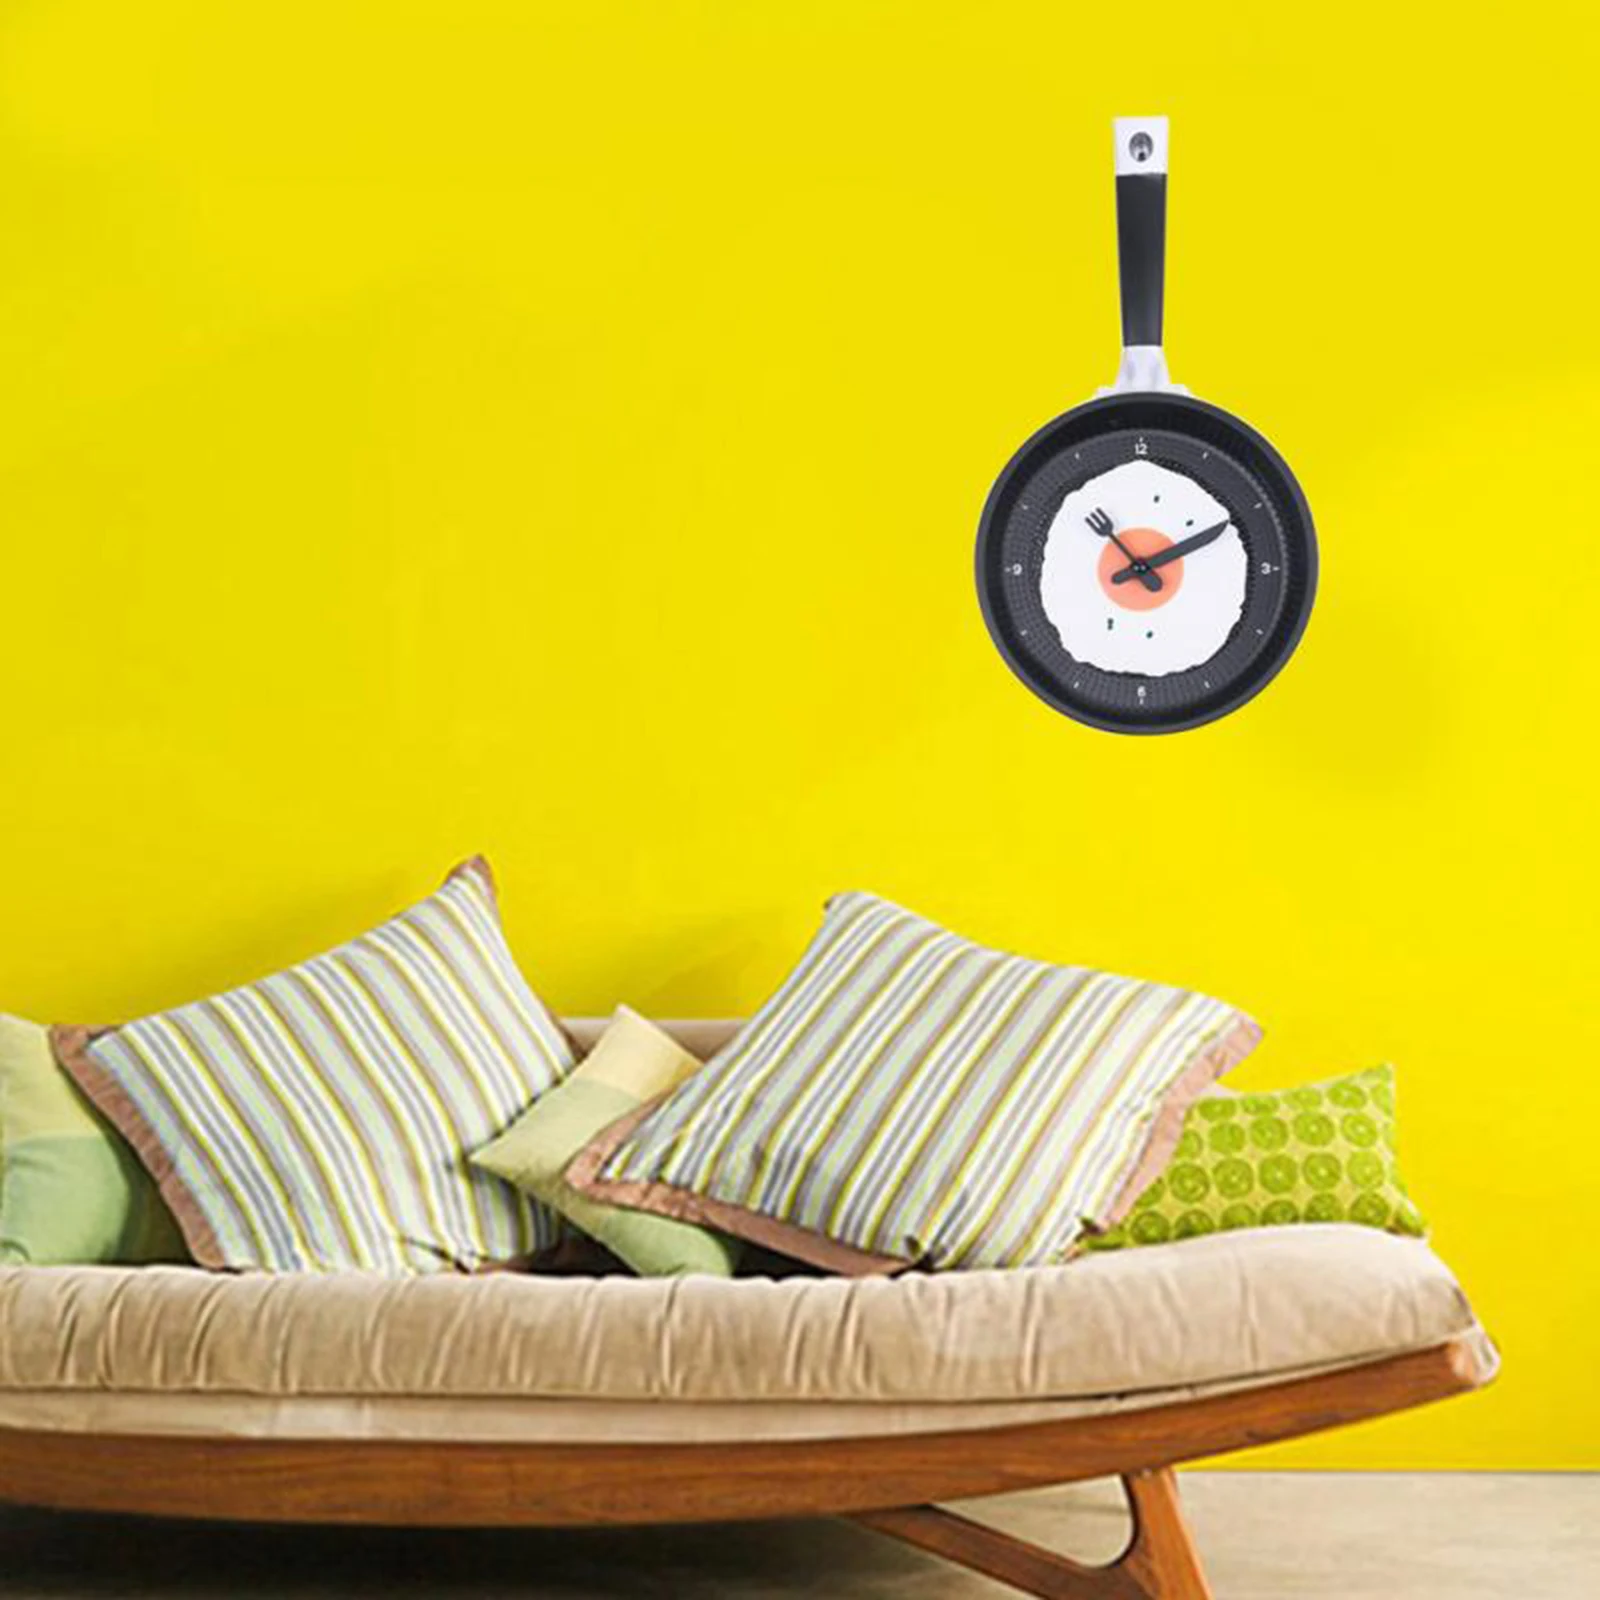 Frying Pan with Fried Egg Shaped Wall Clock, Shabby Chic, Kitchen Themed Unique Wall Clock